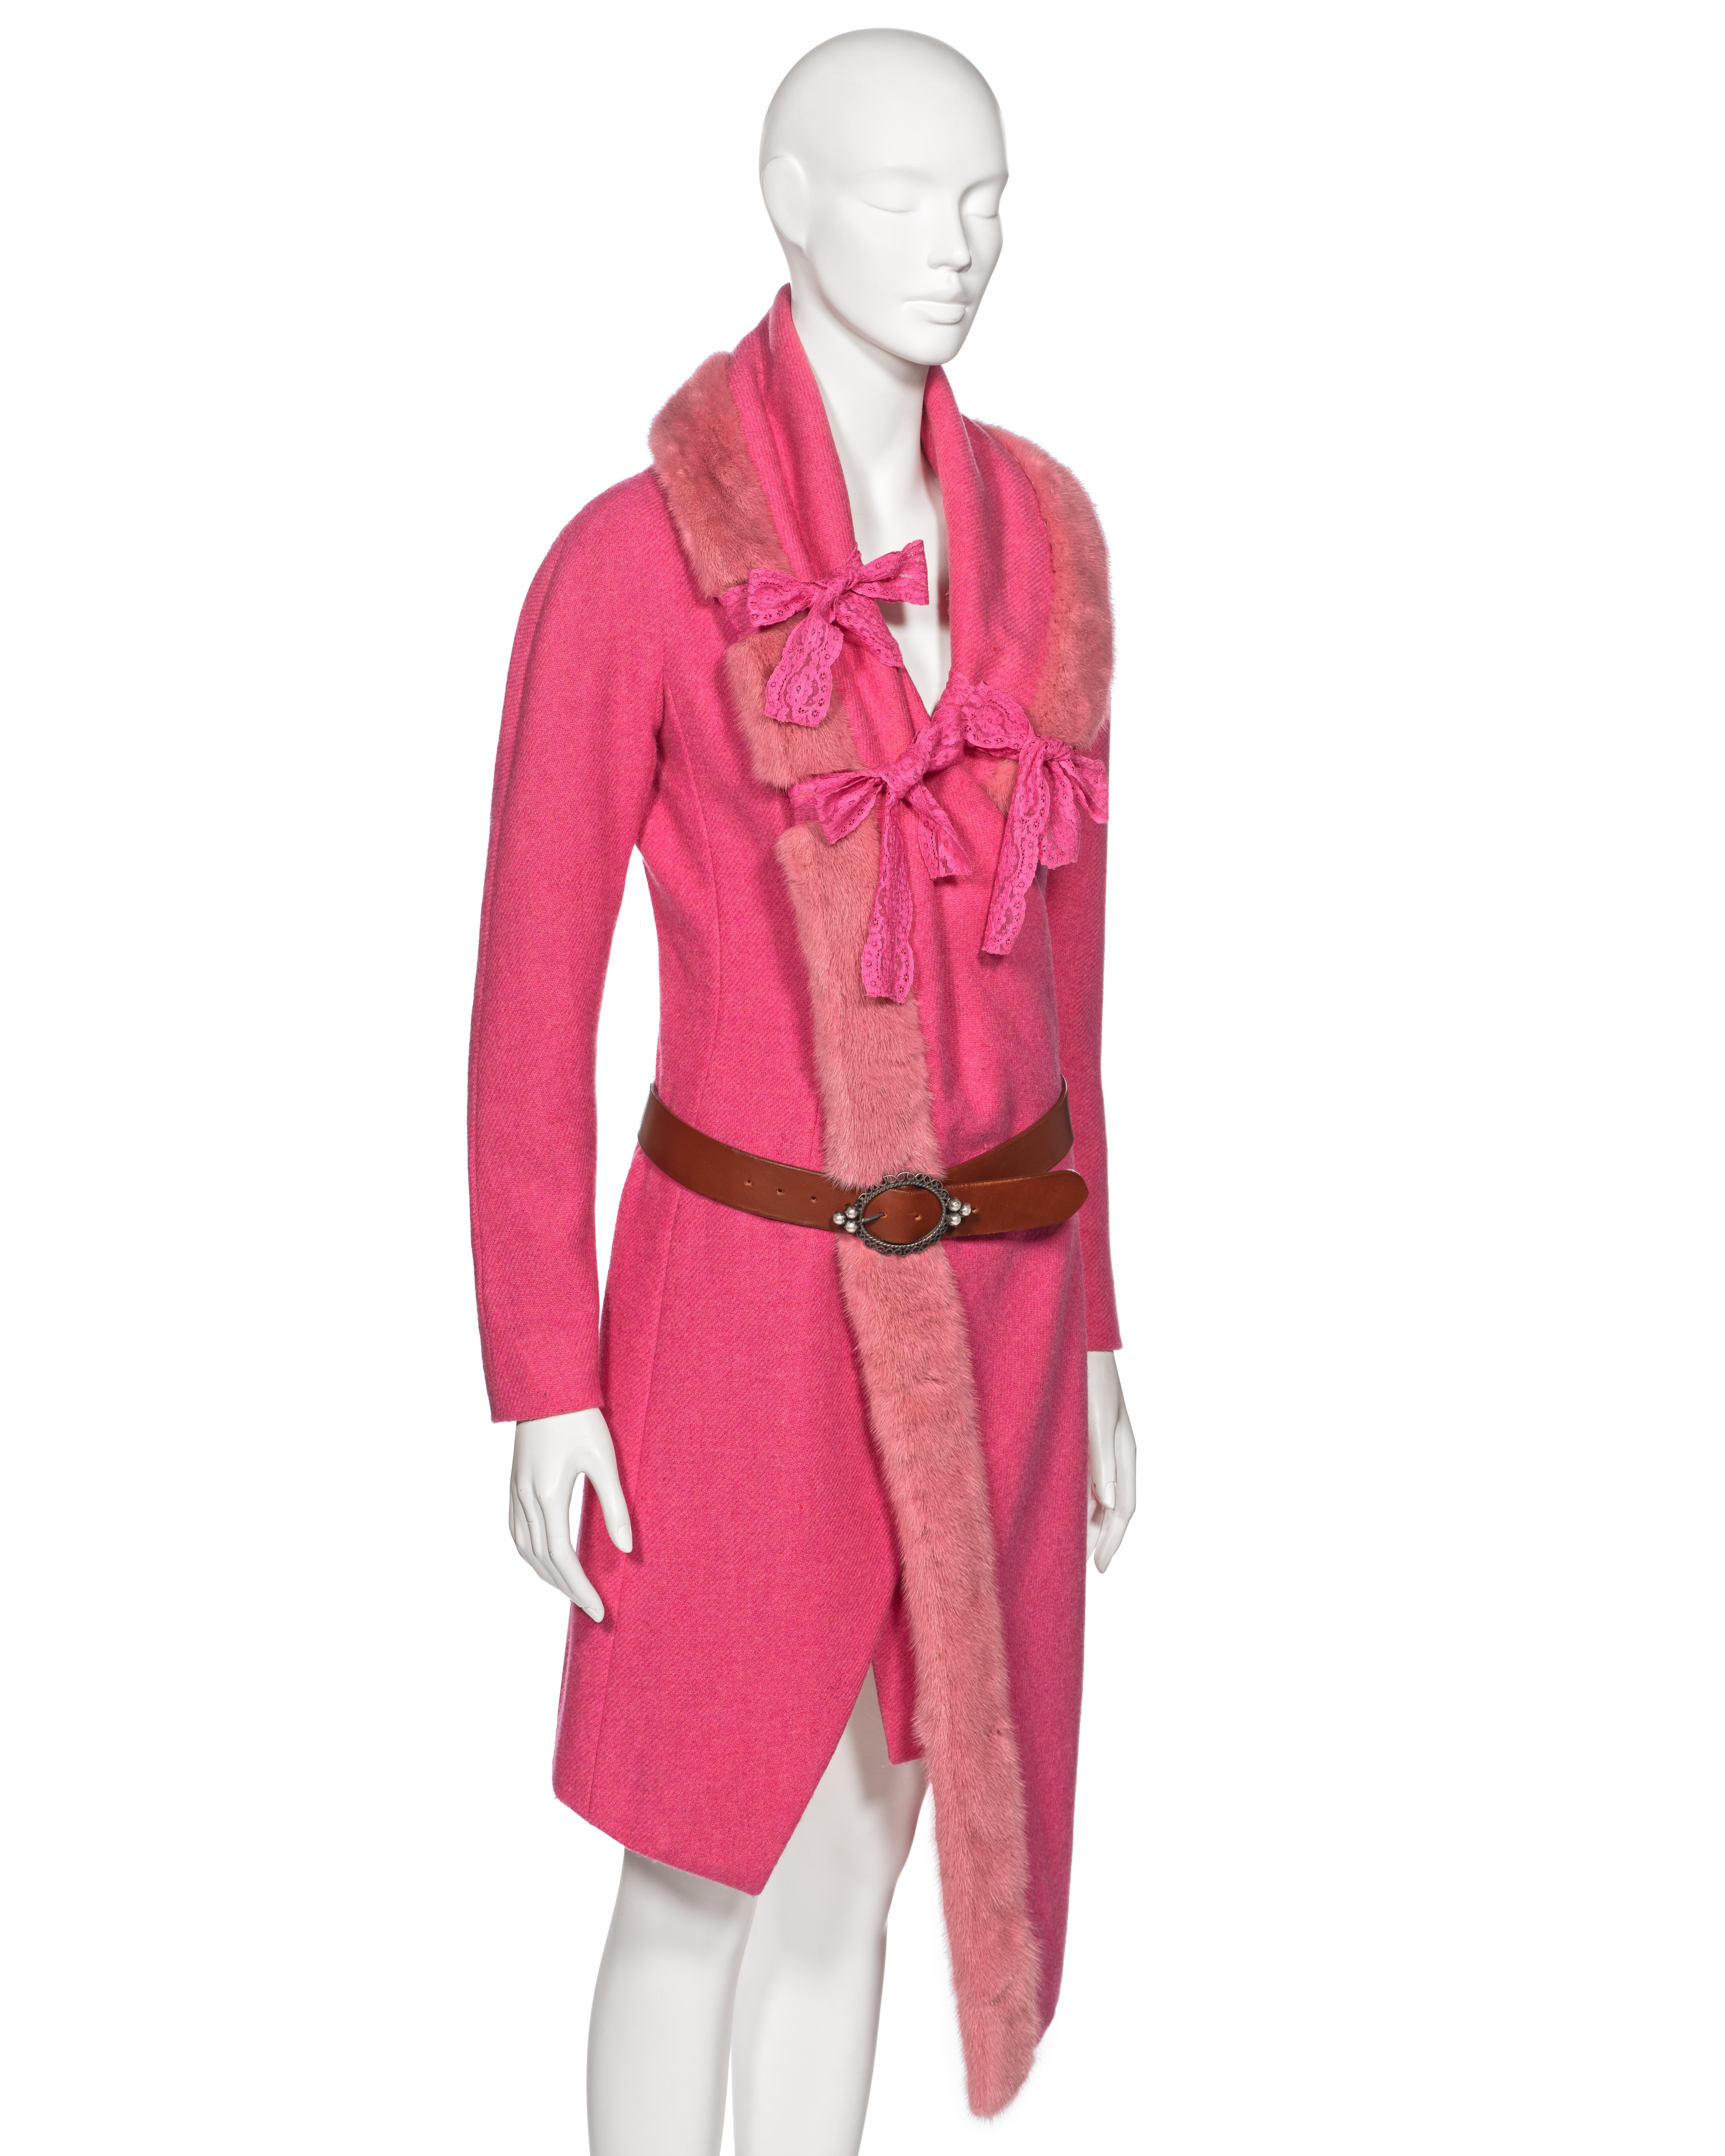 Christian Dior by John Galliano Pink Tweed Coat With Mink Fur Collar, fw 1998 For Sale 2